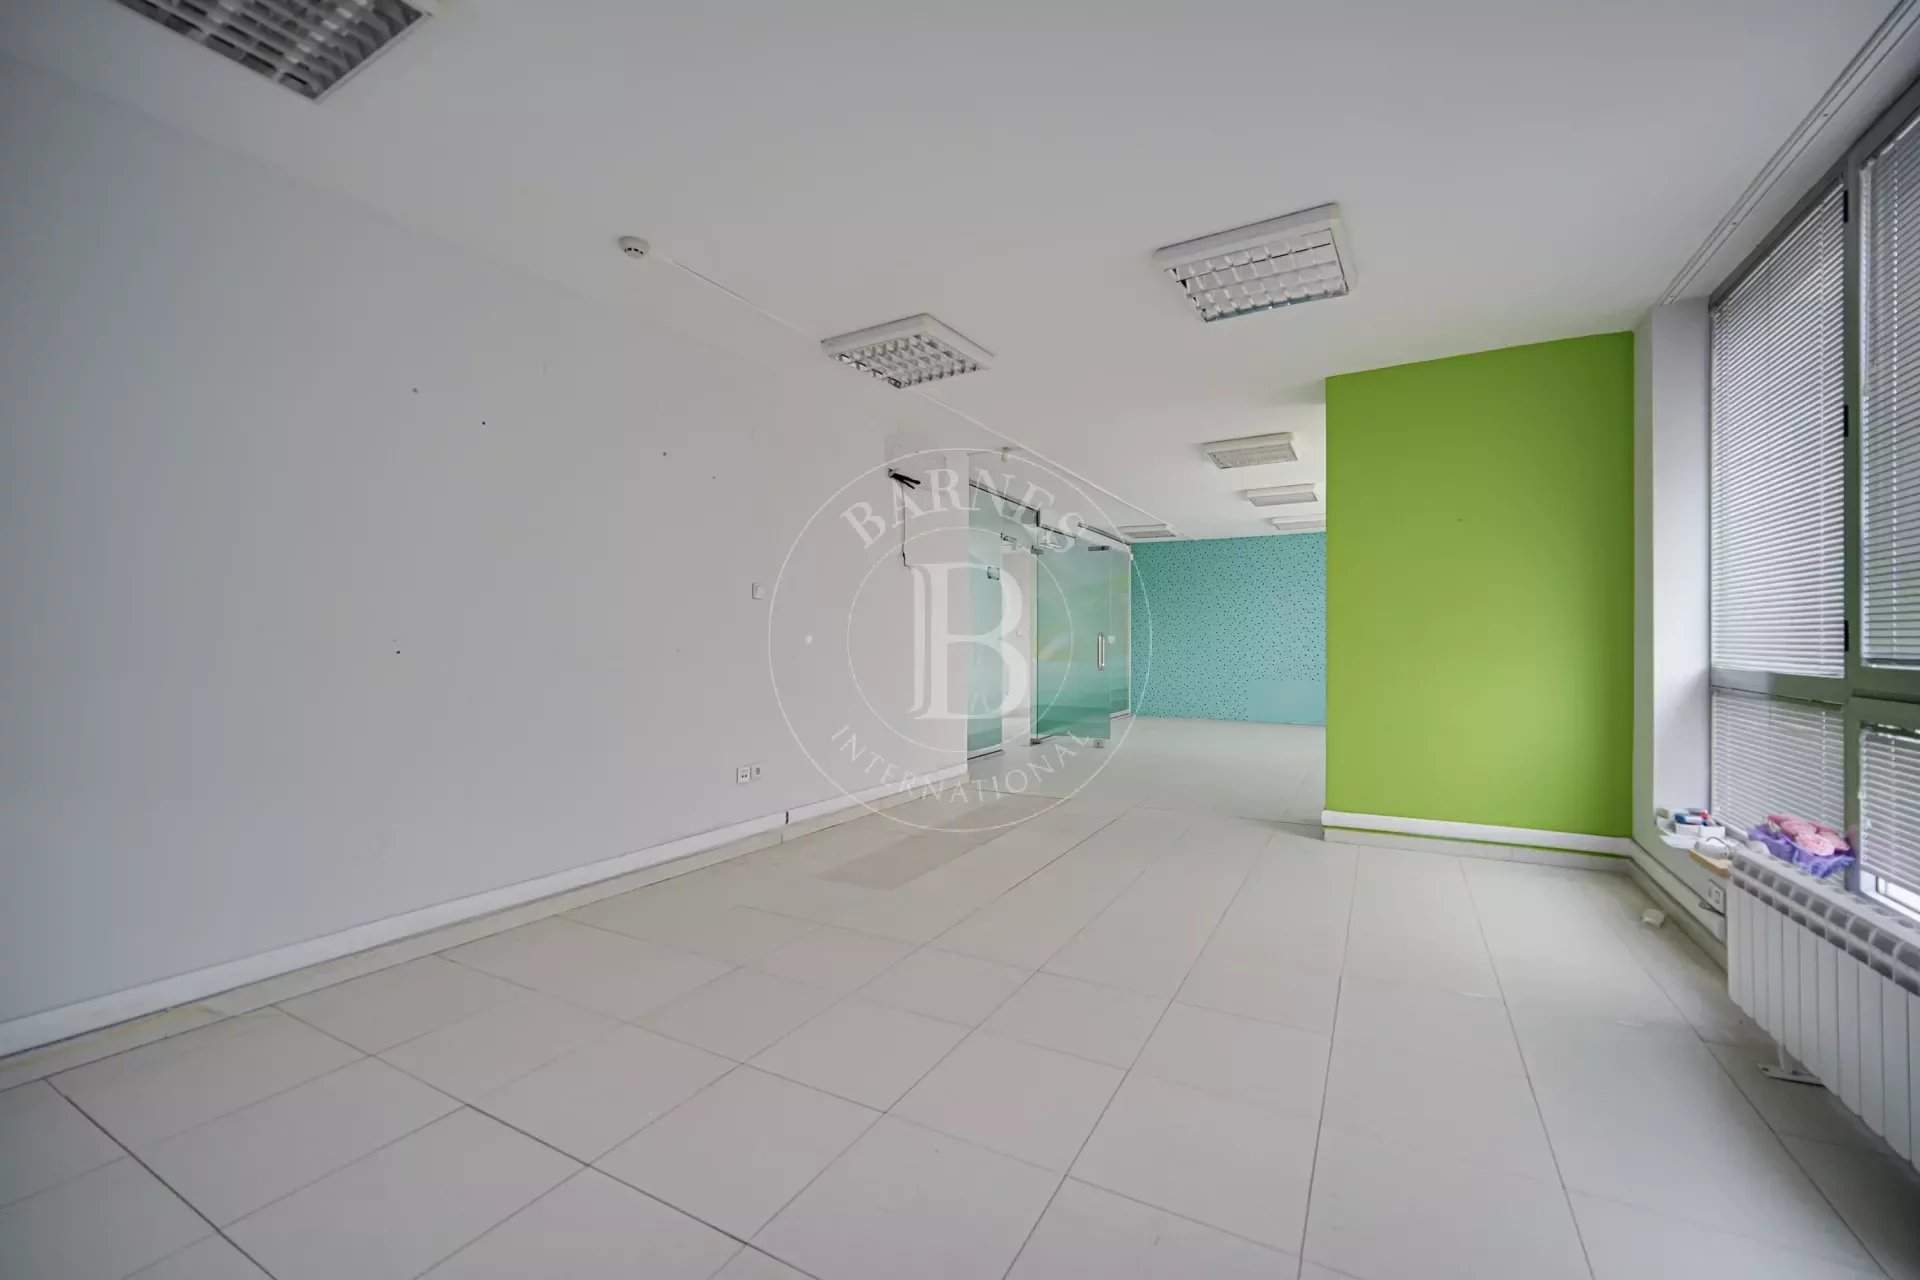 Sofia  - Offices  - picture 11